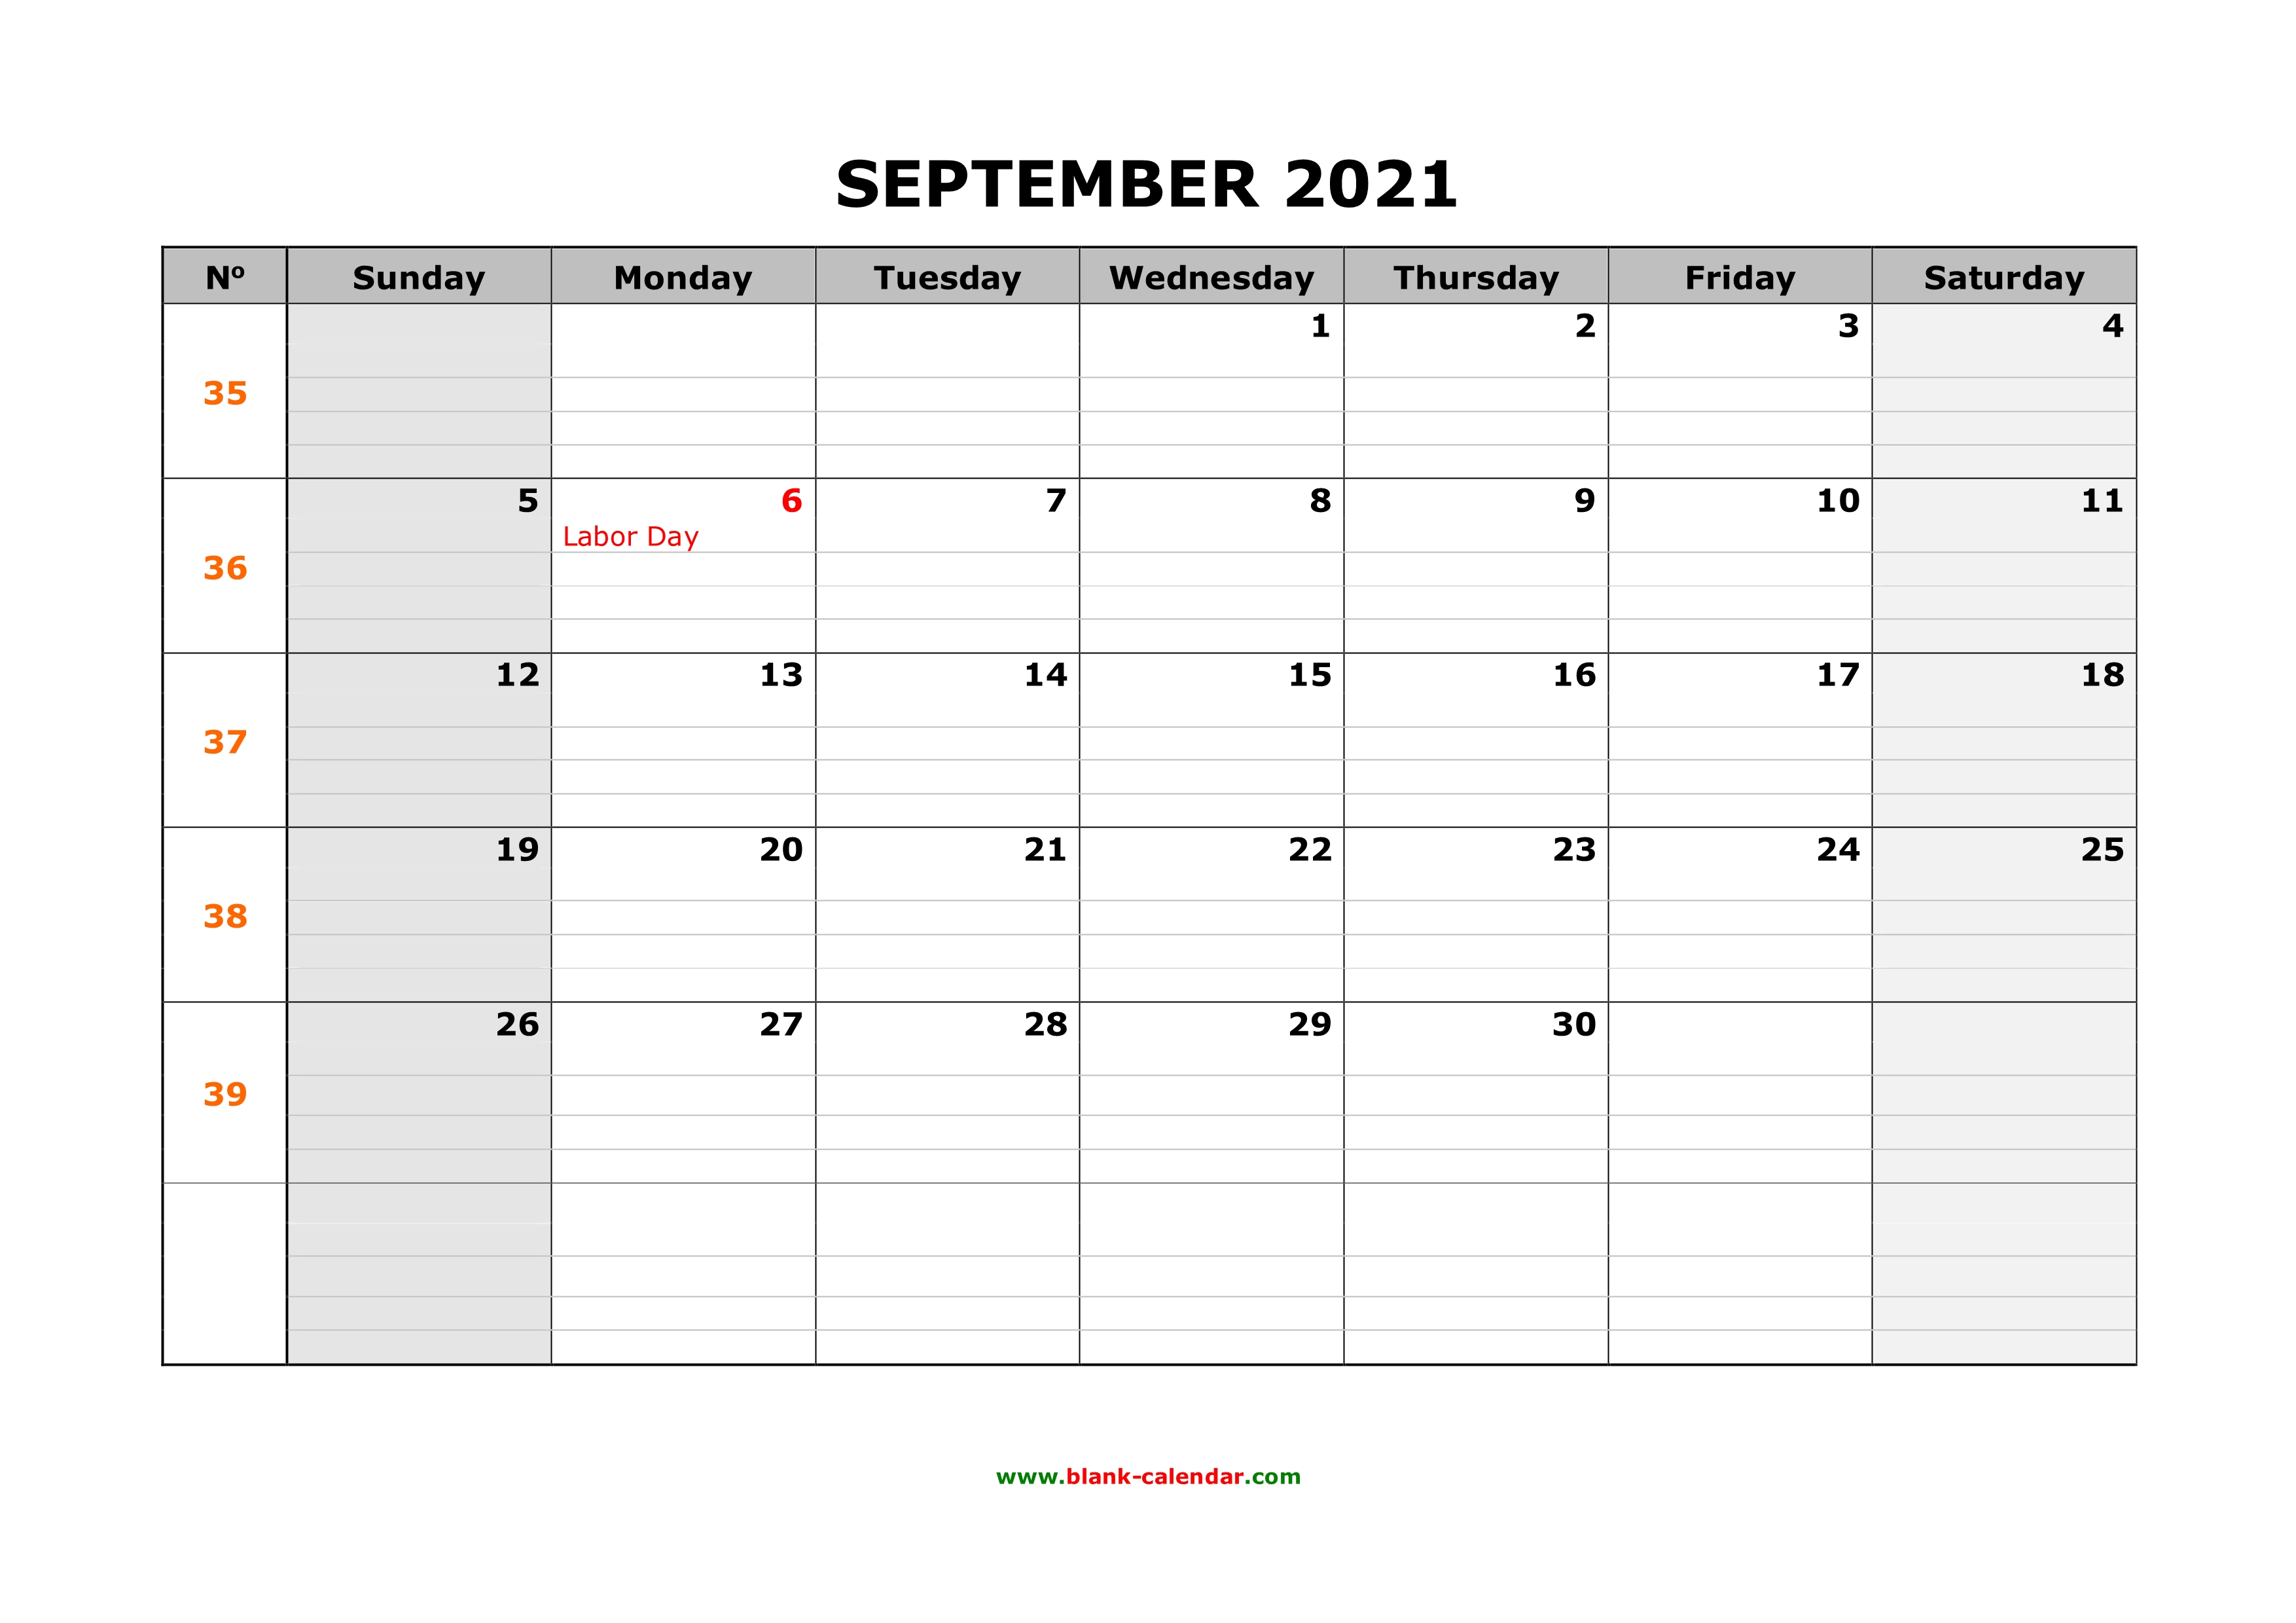 Free Download Printable September 2021 Calendar Large Box Grid Space For Notes